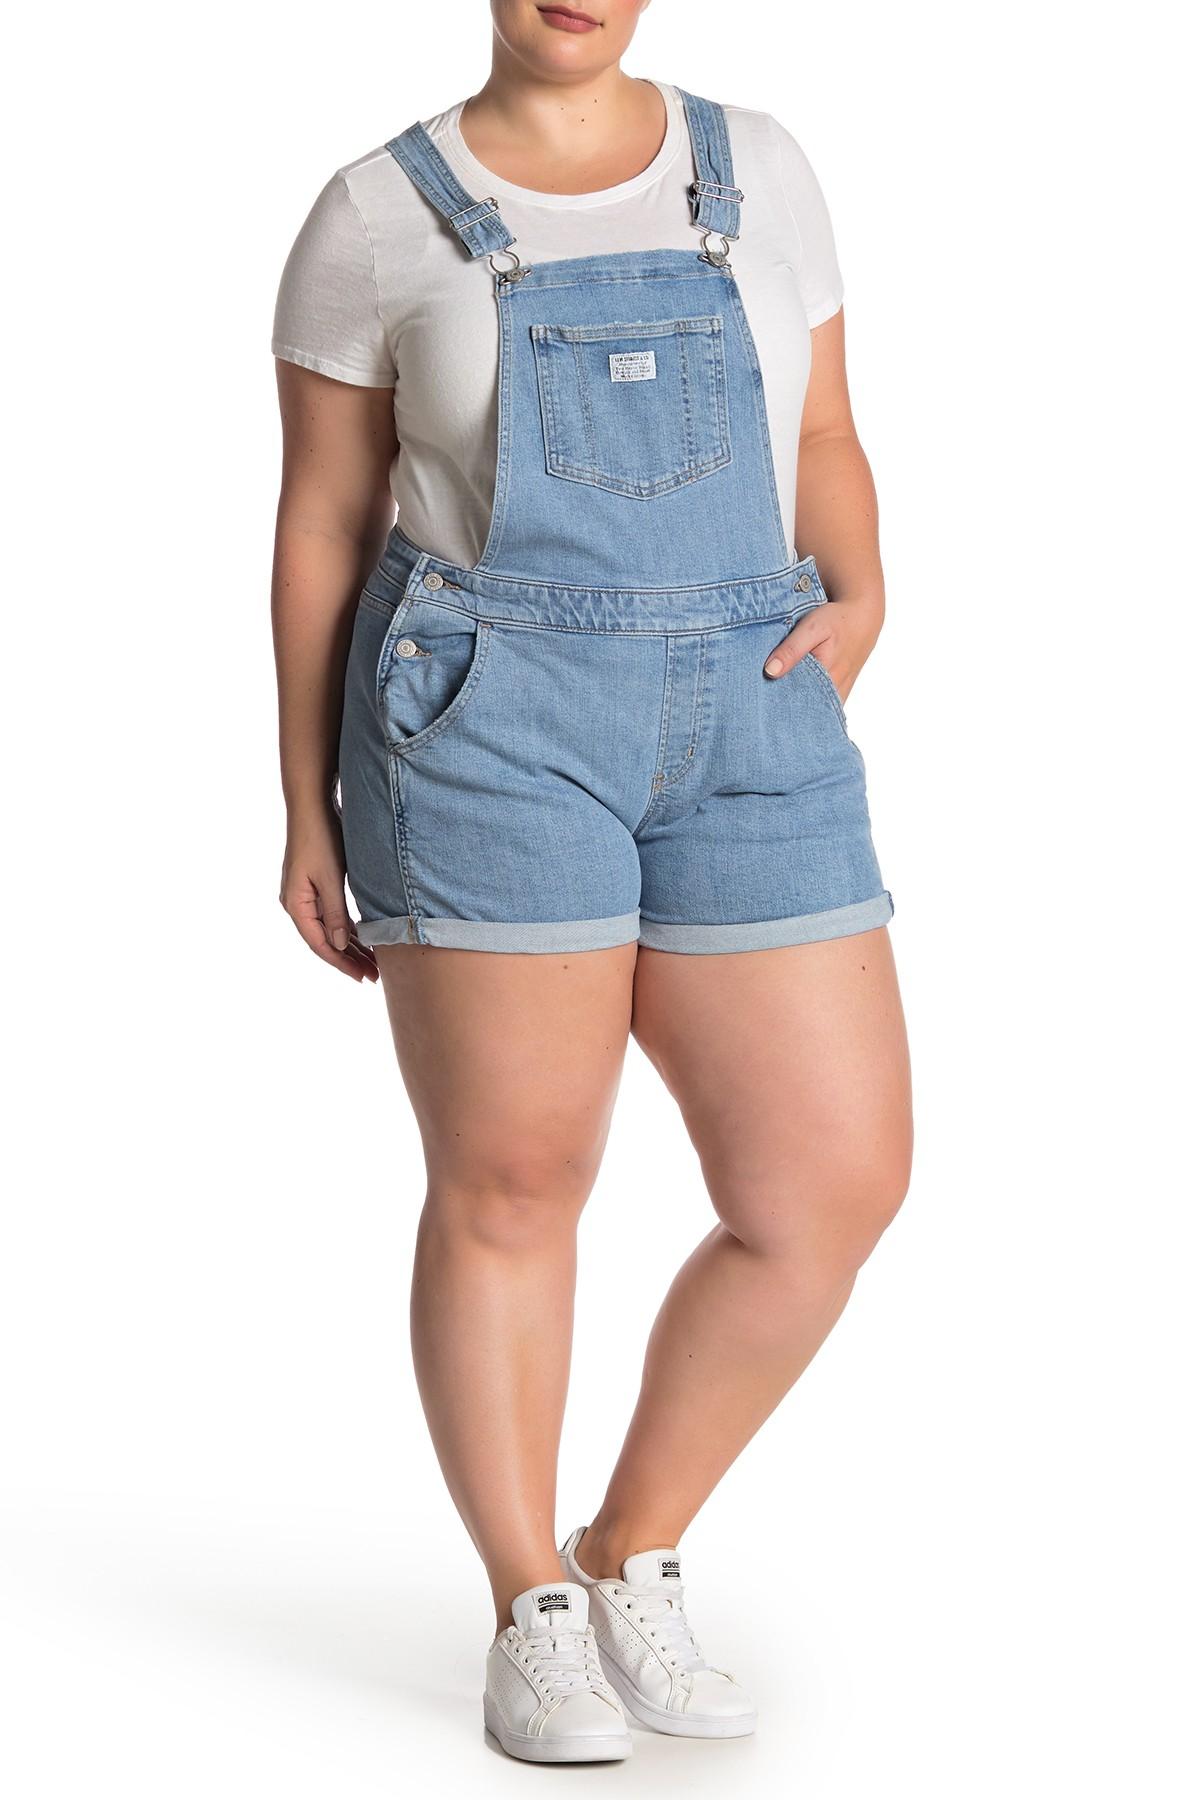 levi's plus overalls Cheaper Than Retail Price> Buy Clothing, Accessories  and lifestyle products for women & men -